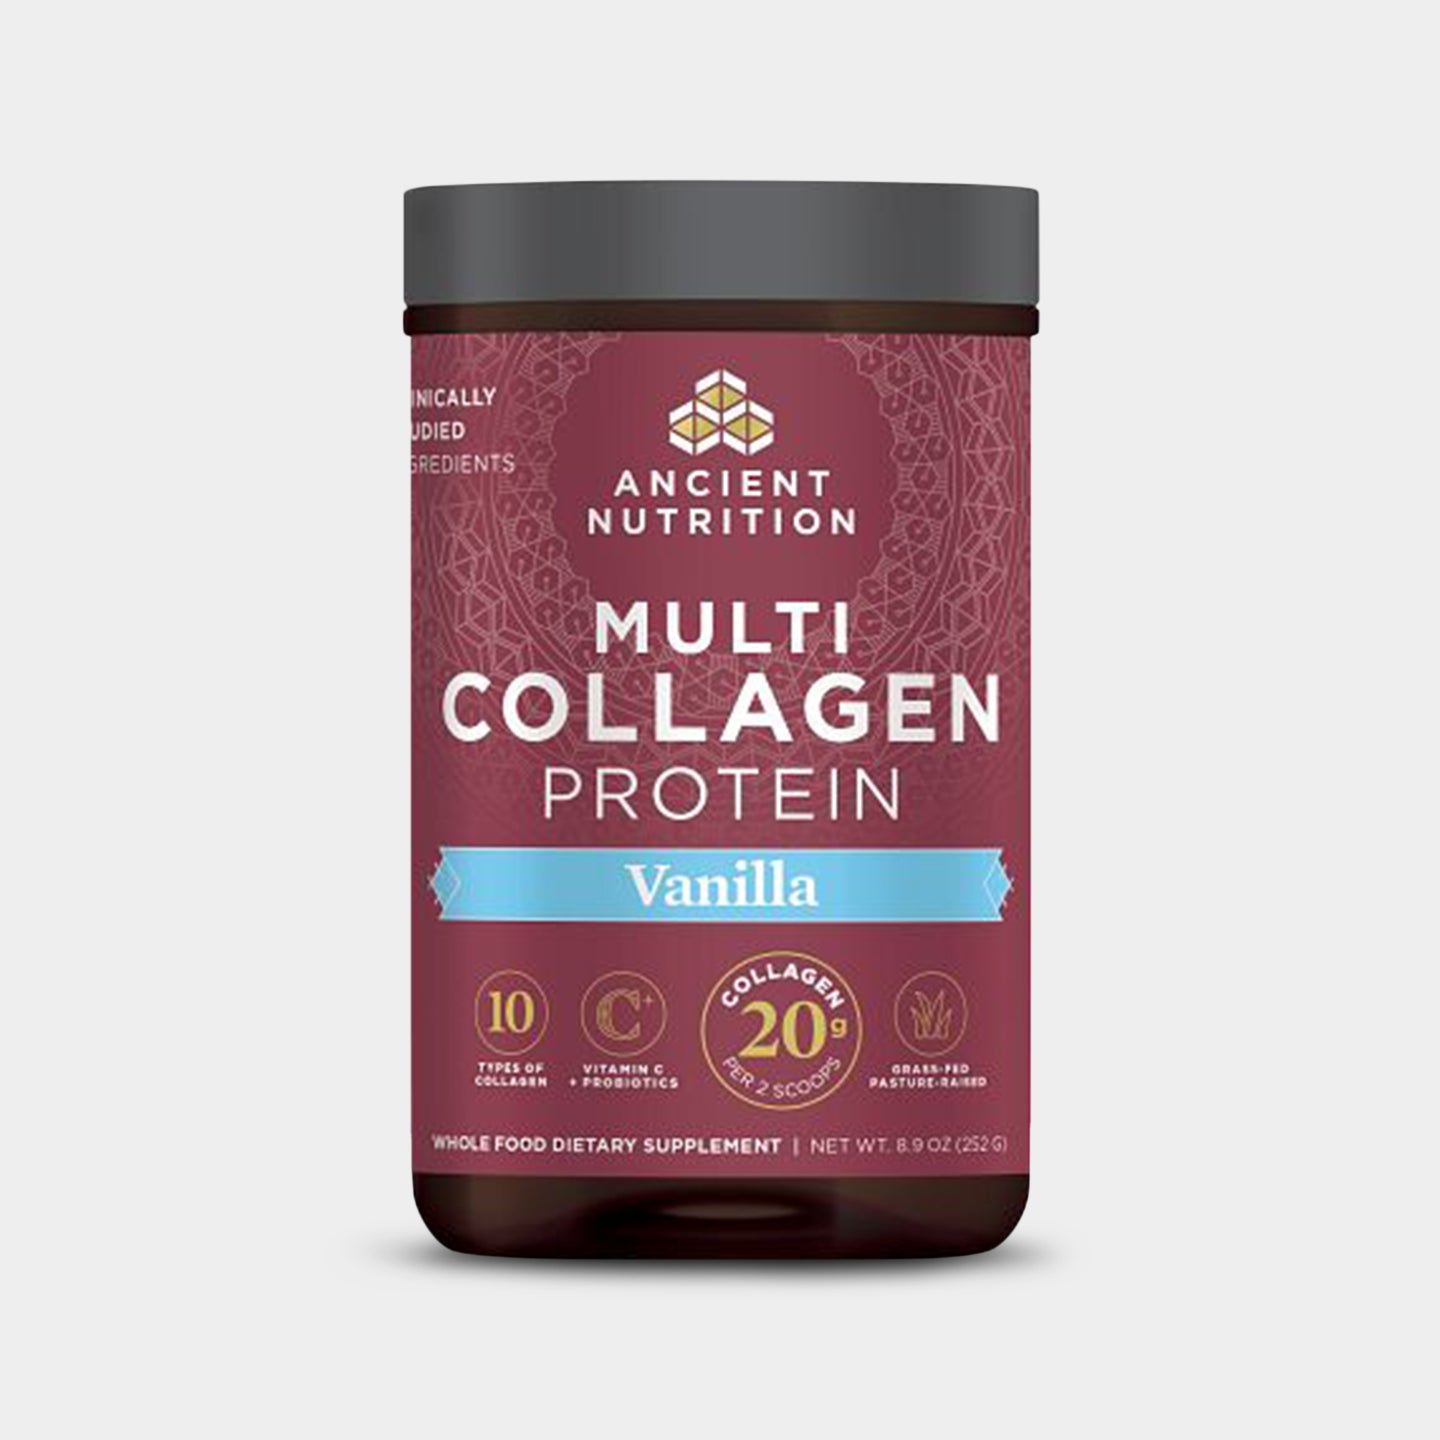 Ancient Nutrition Multi Collagen Protein - 20g, Vanilla, 24 Servings A1